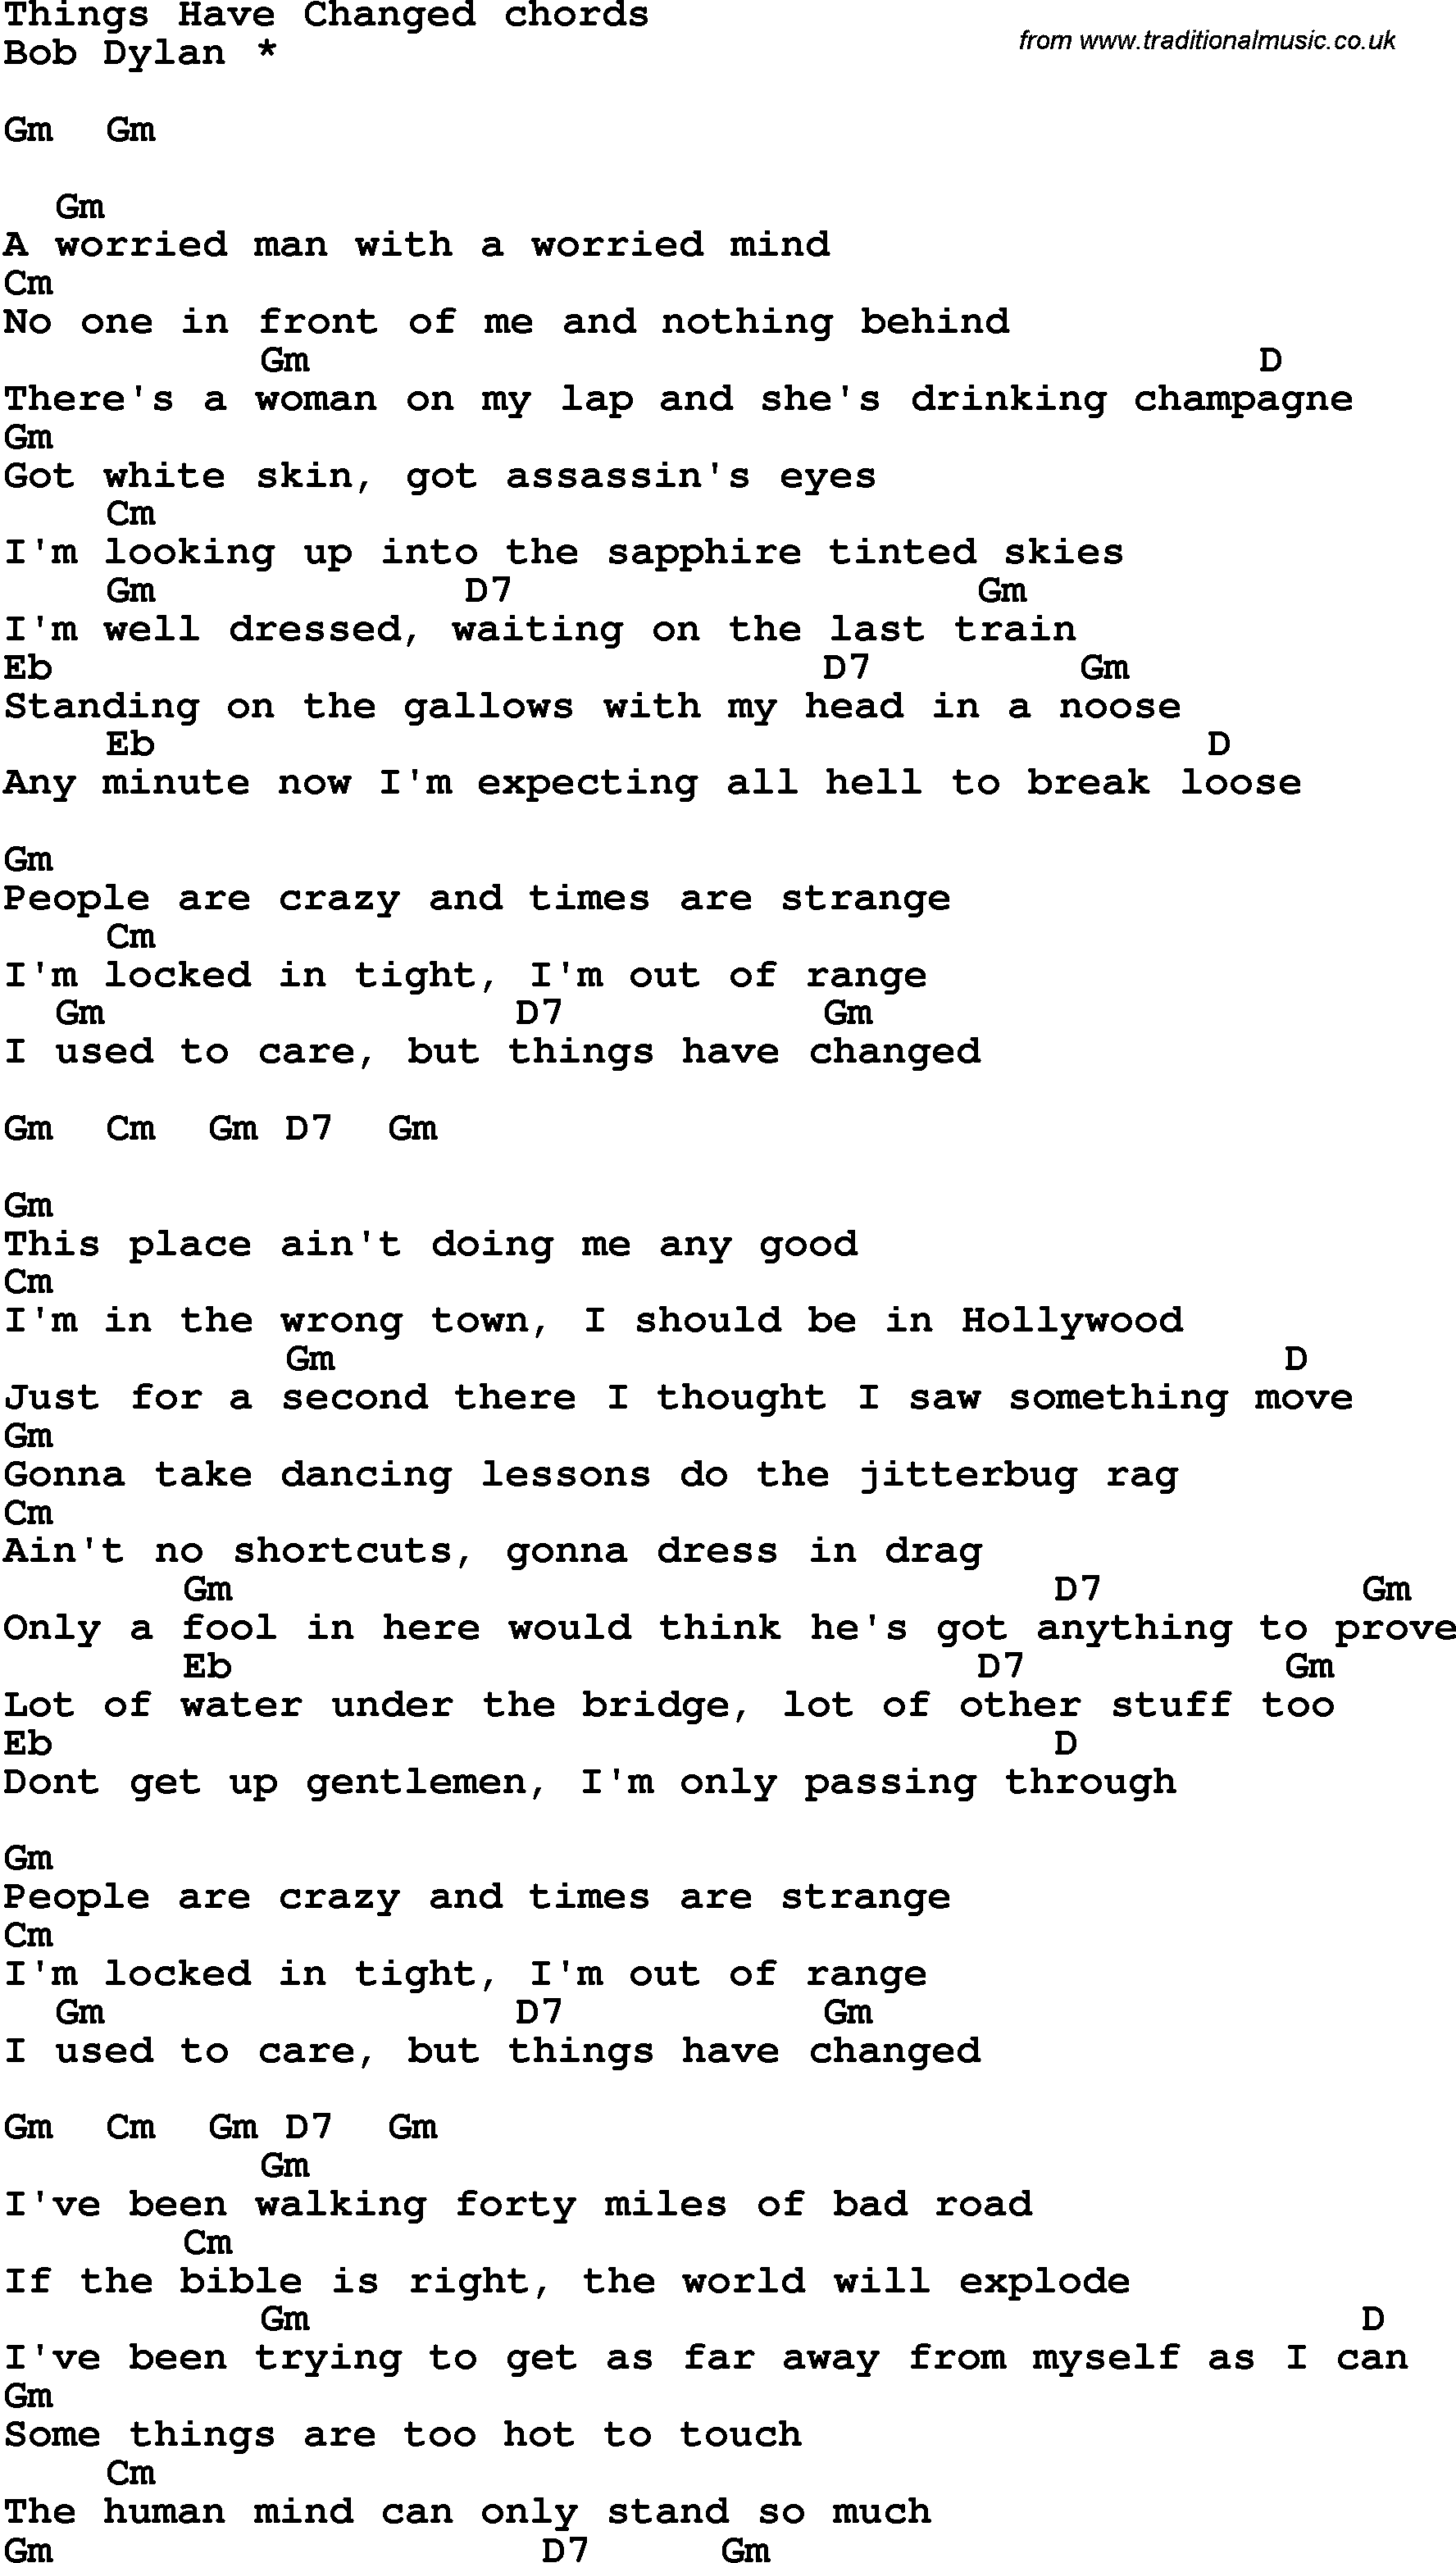 Song Lyrics with guitar chords for Things Have Changed